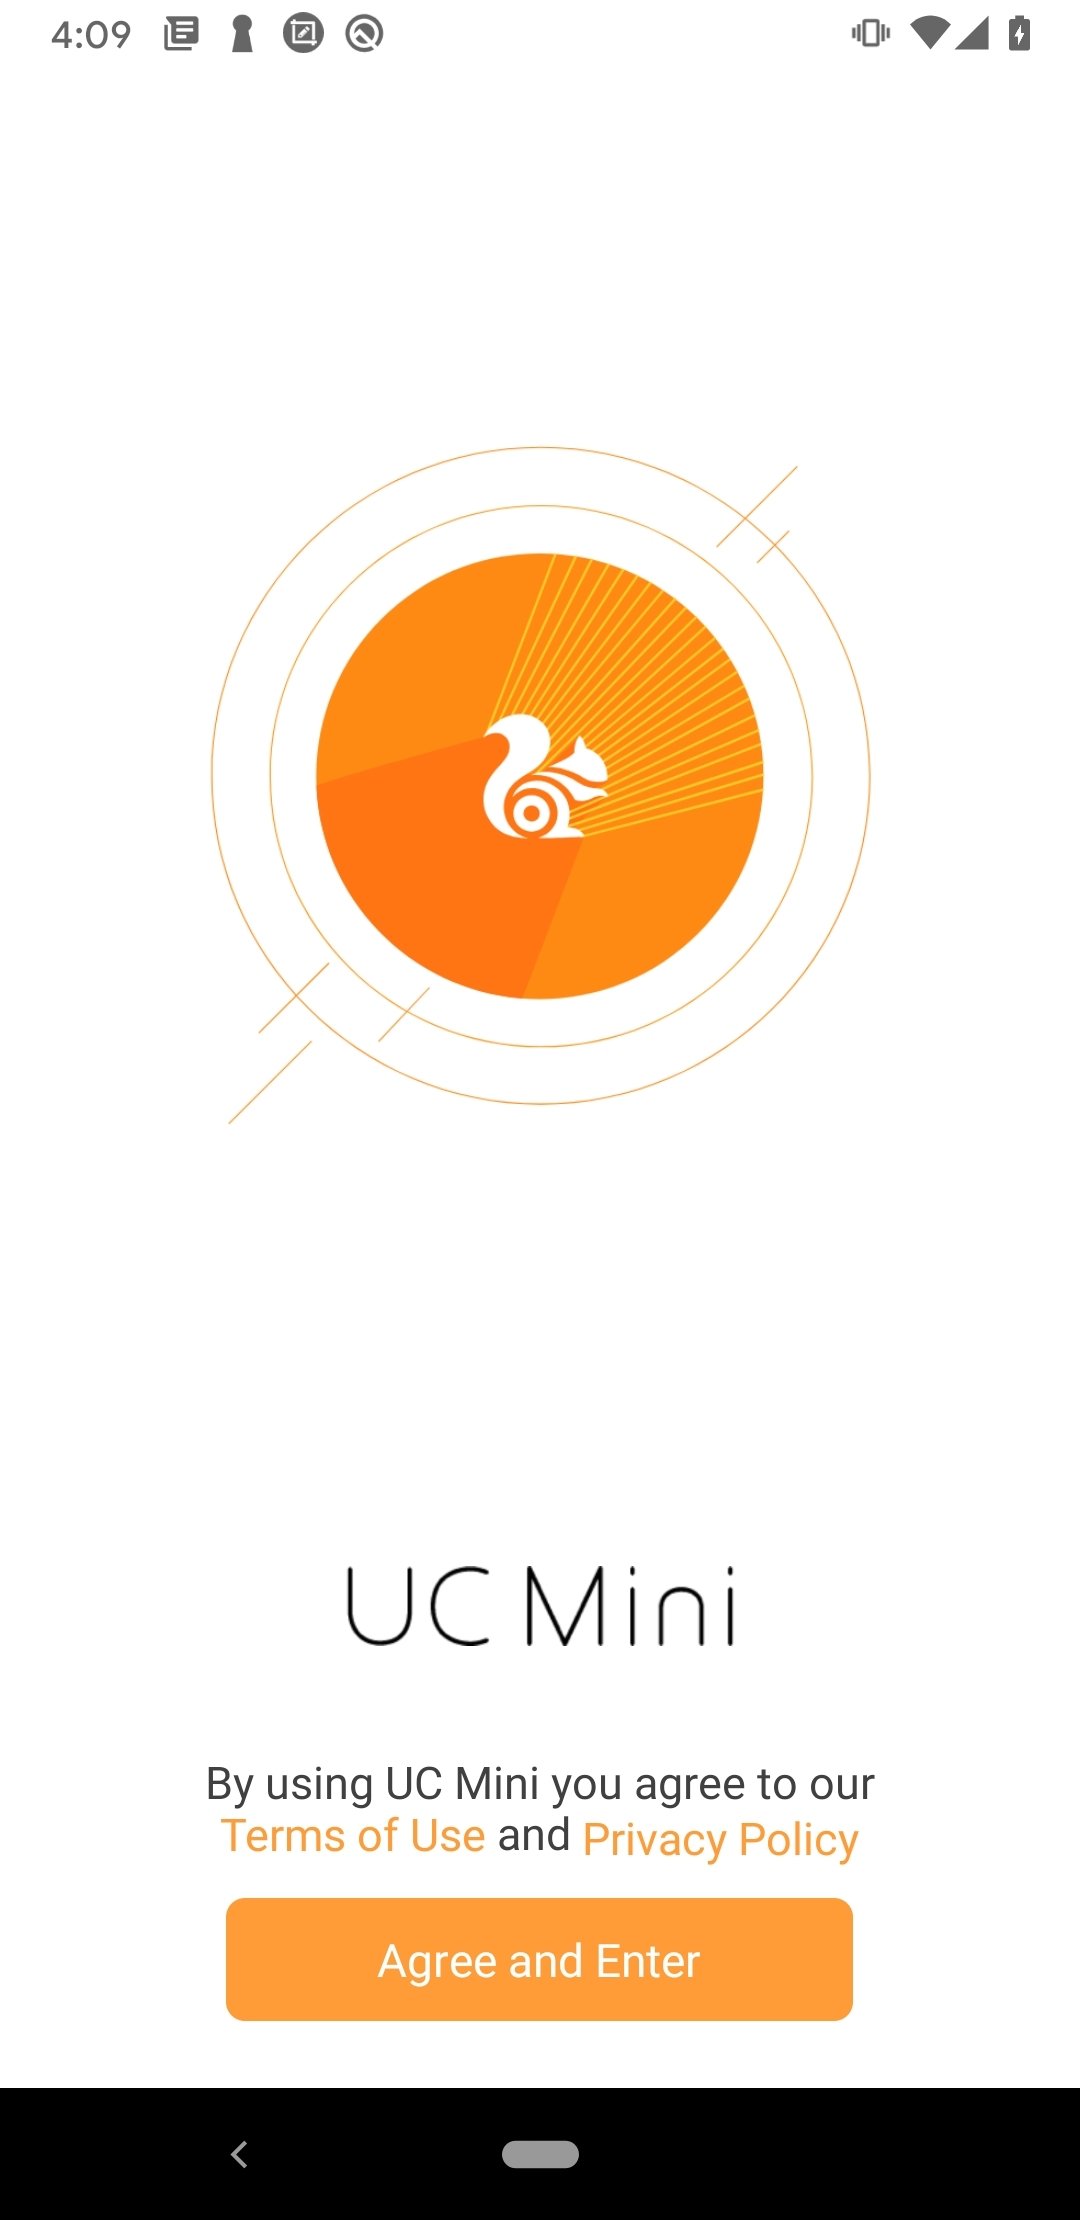 uc browser fast and free download